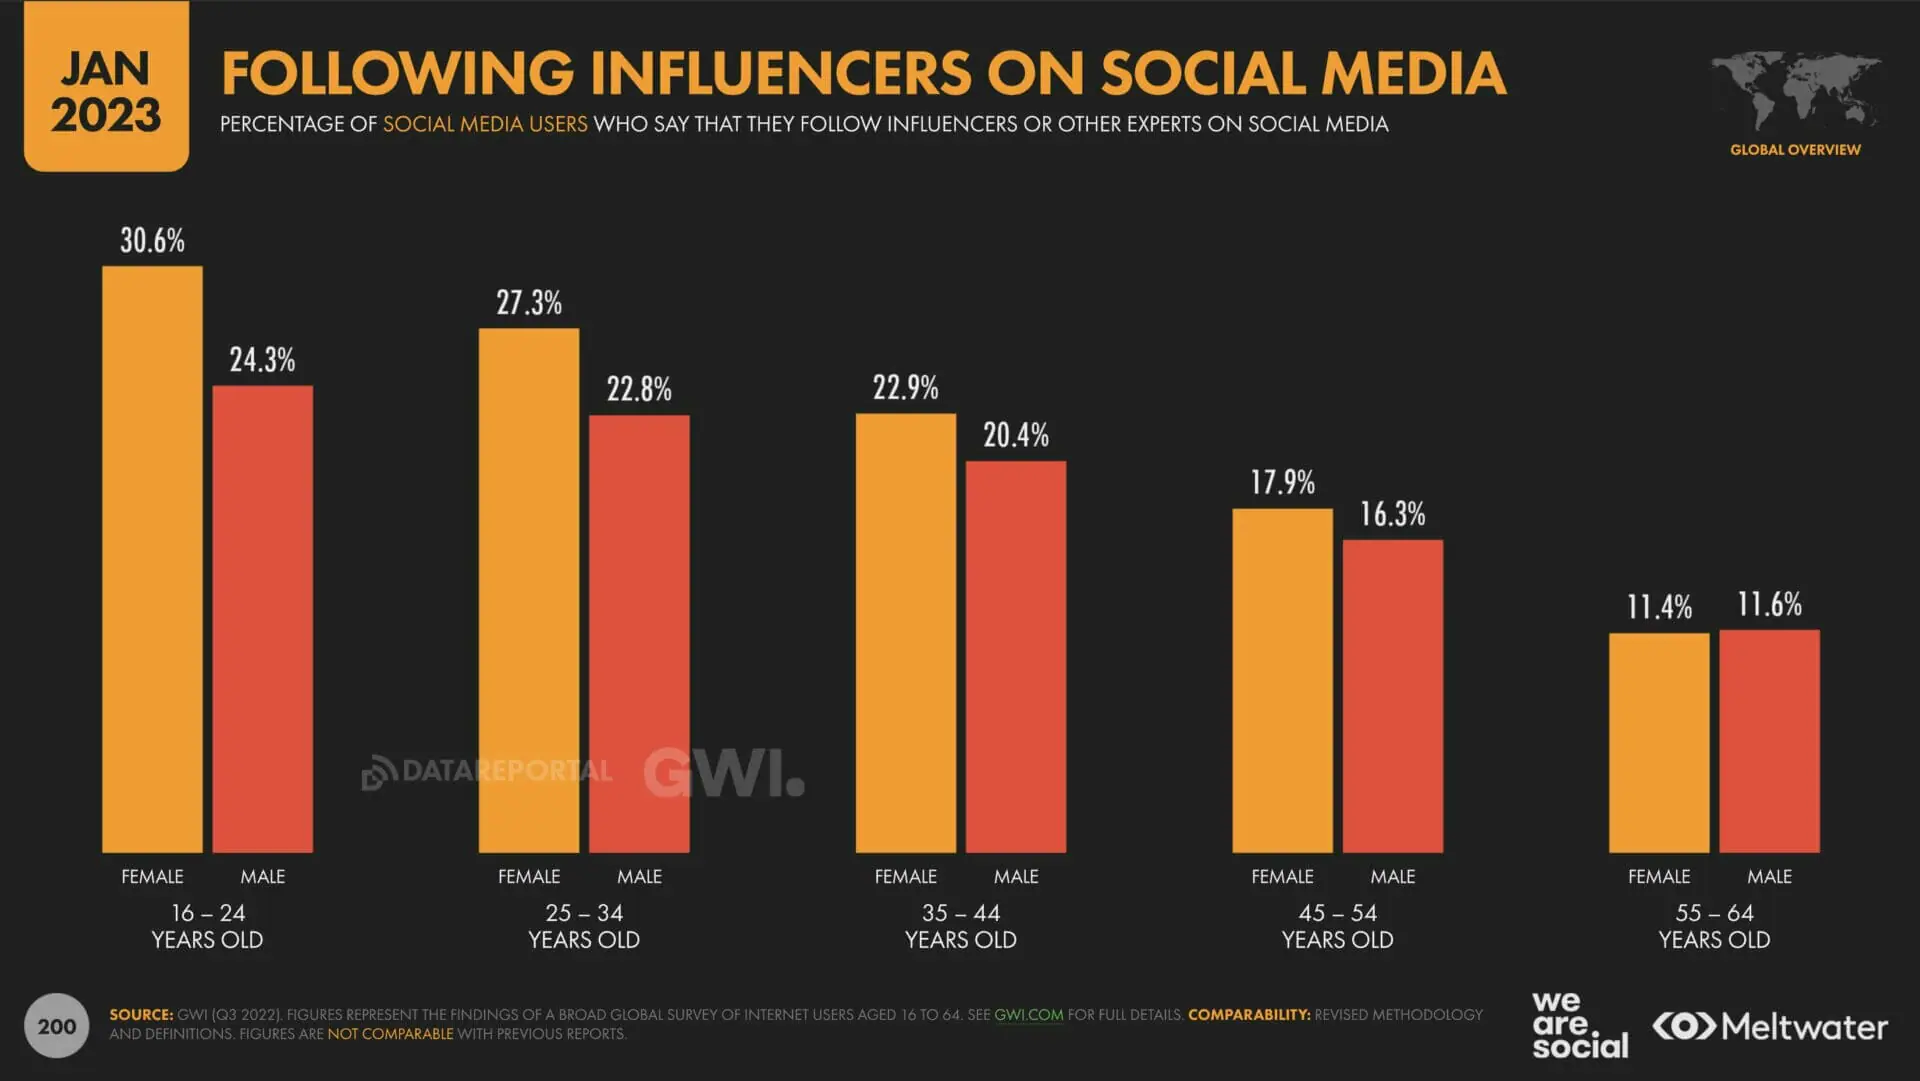 audience age demographics that follow influencers on social media